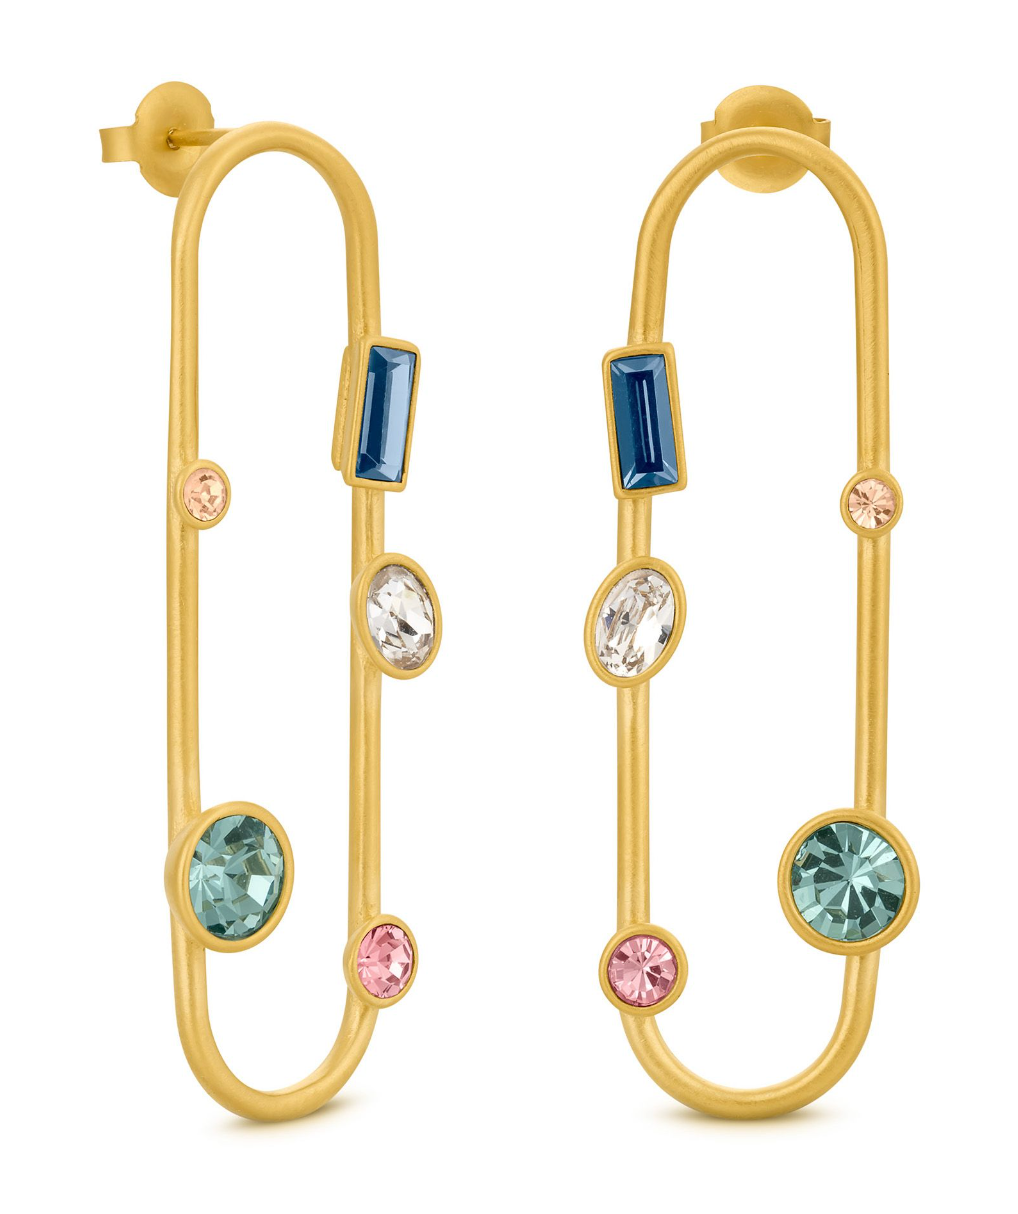 Long Gold Earrings With Crystals